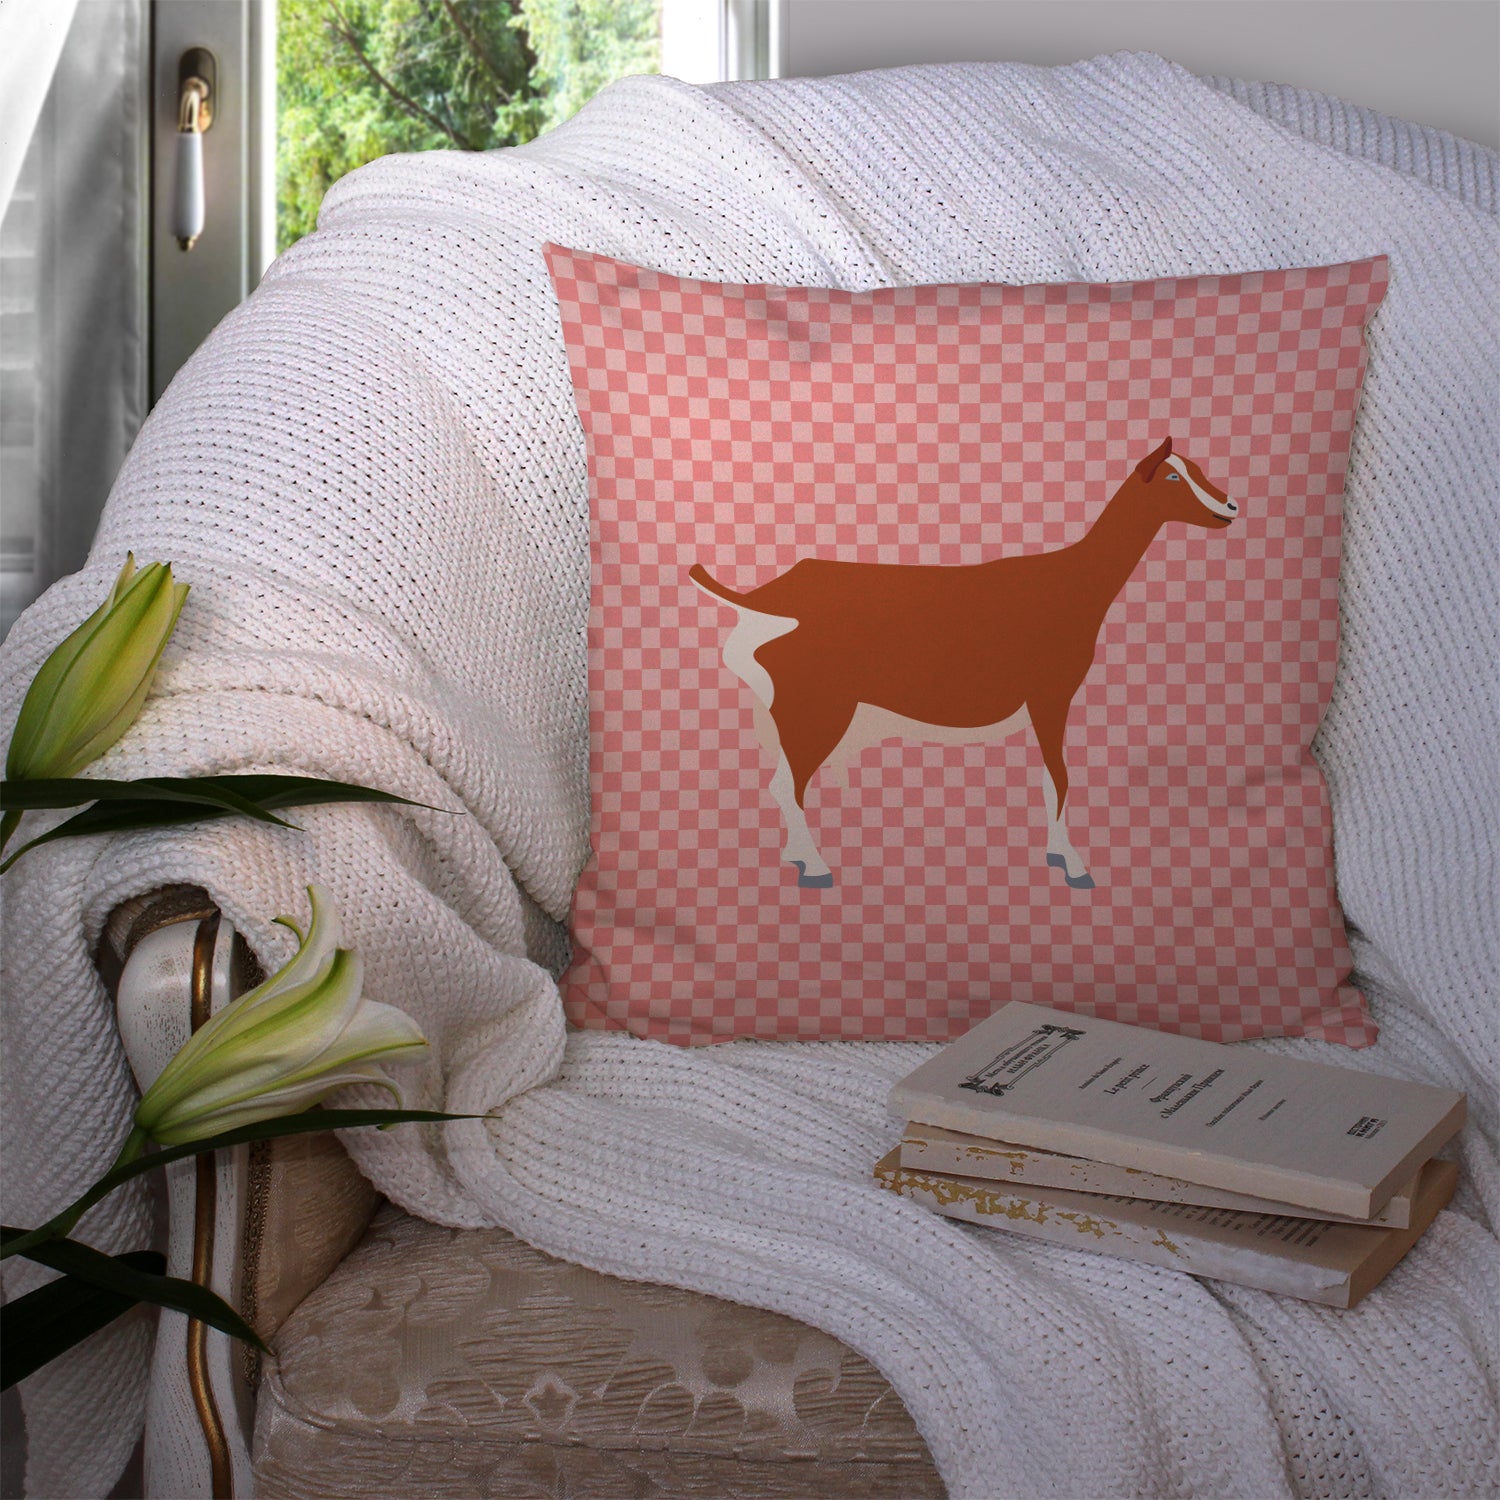 Toggenburger Goat Pink Check Fabric Decorative Pillow BB7881PW1414 - the-store.com